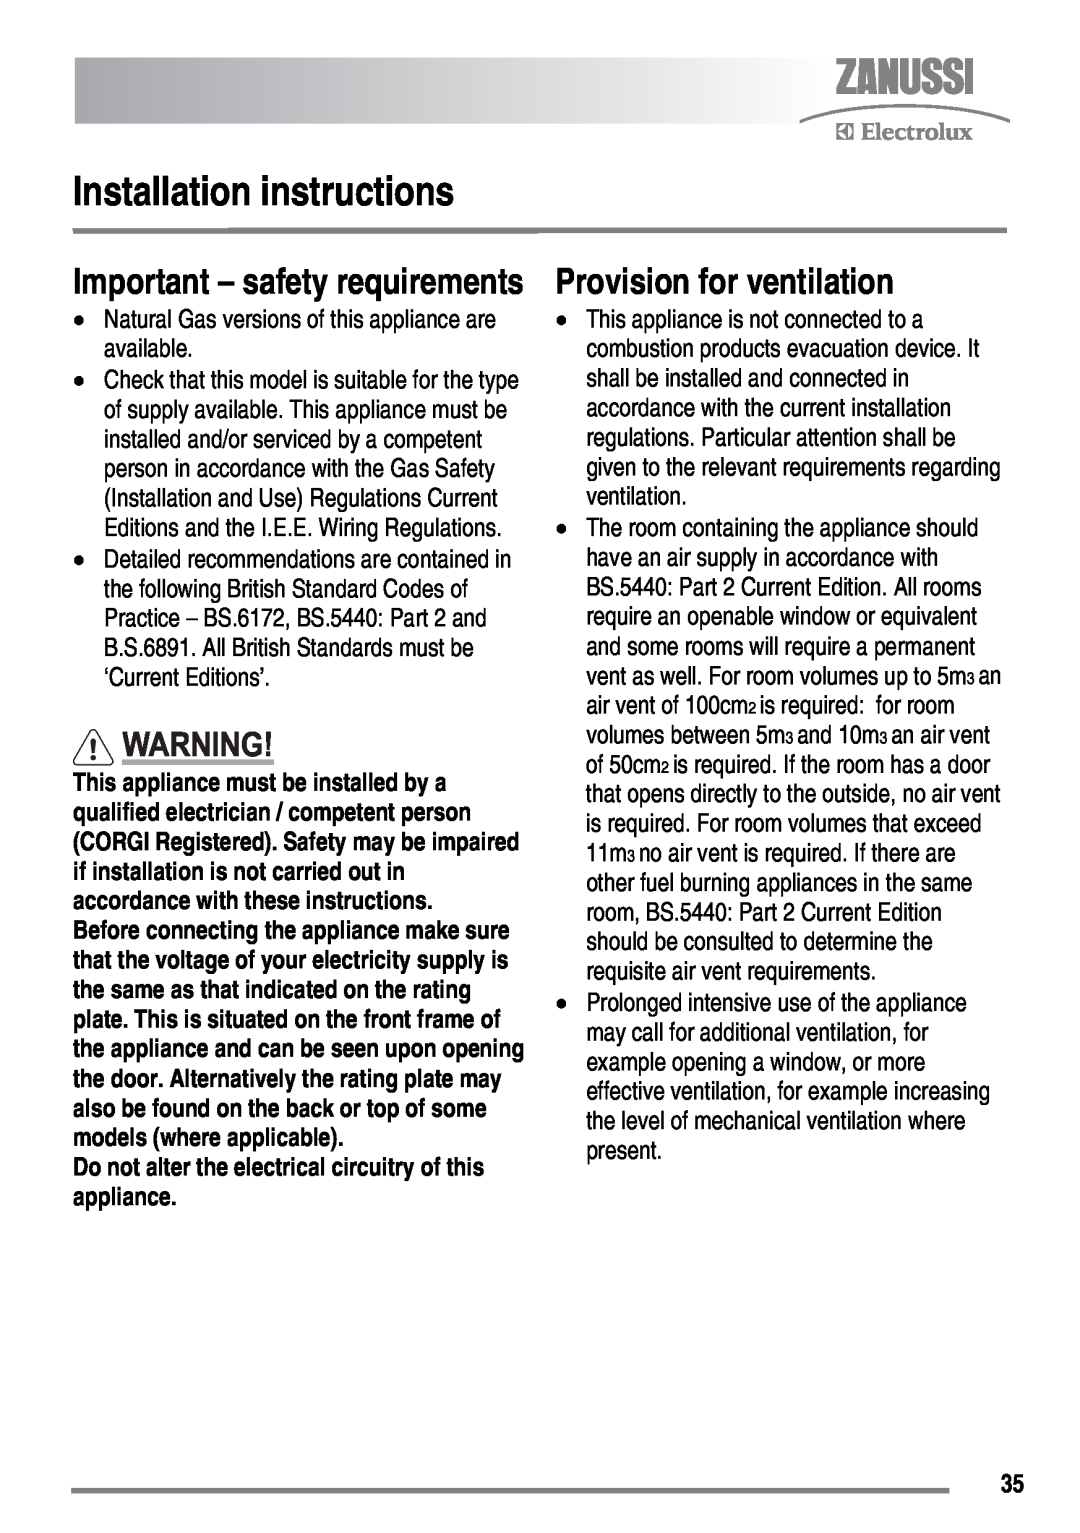 Zanussi ZKG6040 user manual Installation instructions, Provision for ventilation, Important - safety requirements 